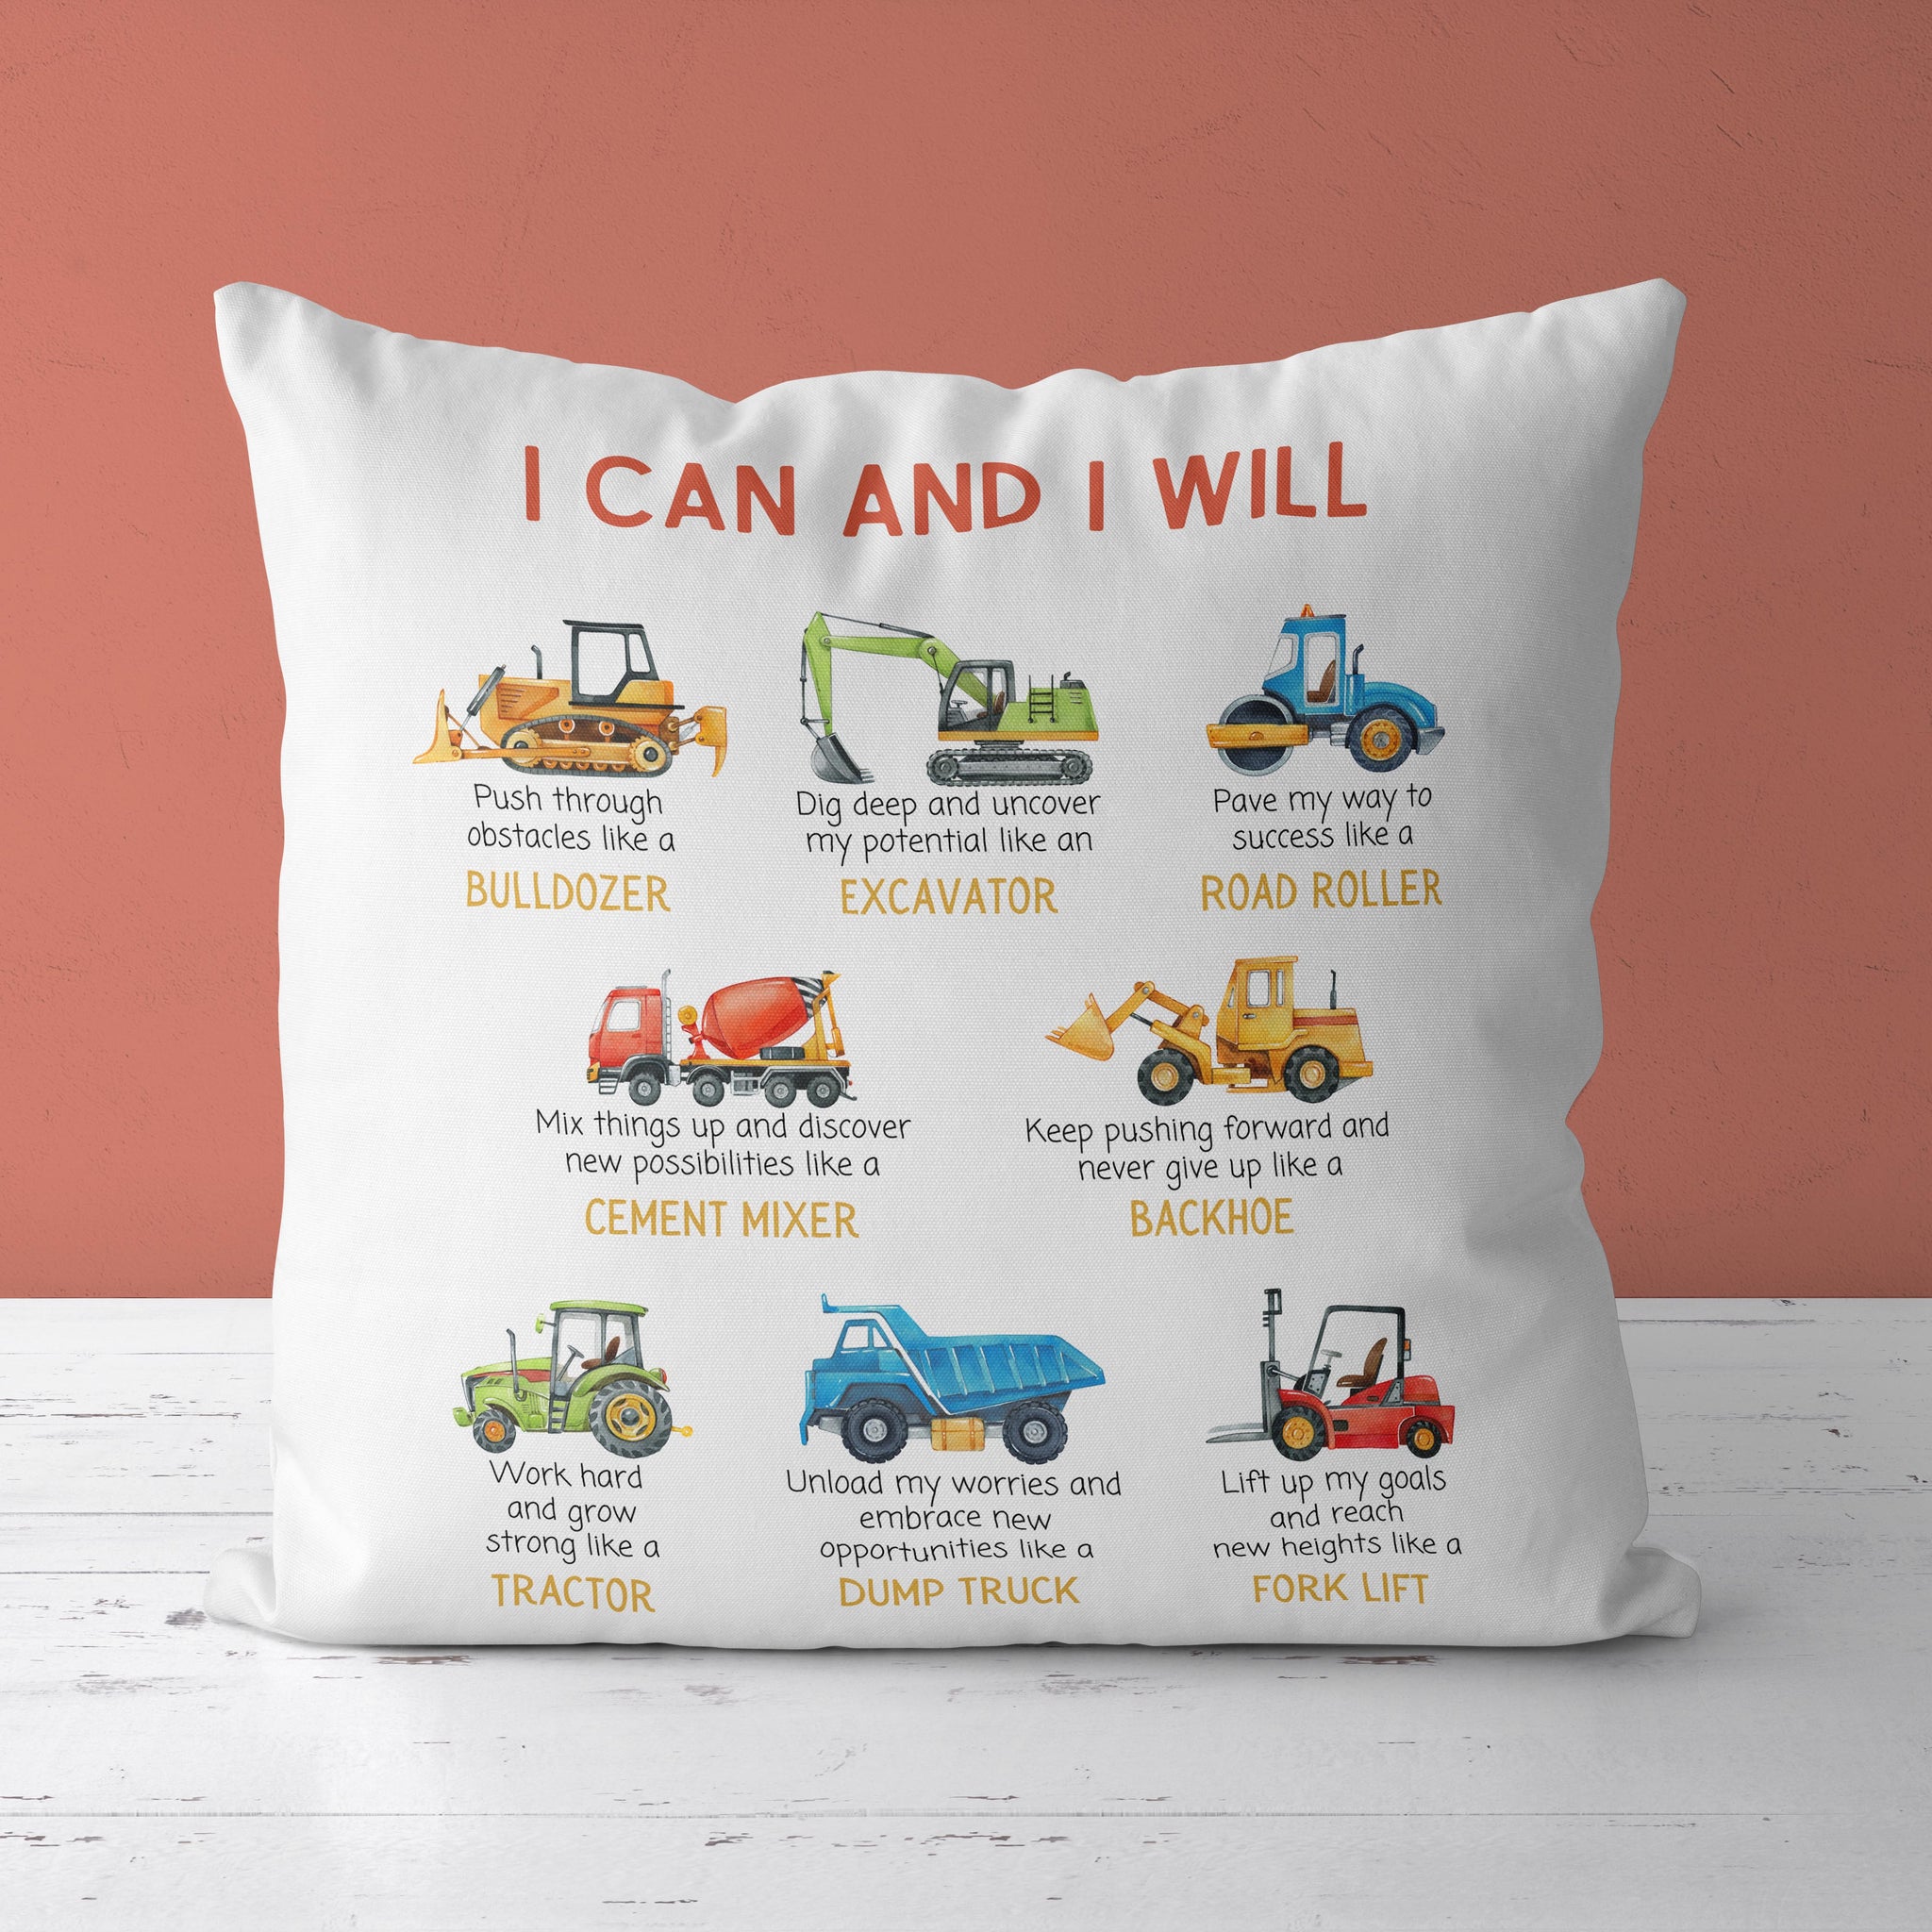 Forklift Truck Pillow Cushion. Personalized Accent Pillows